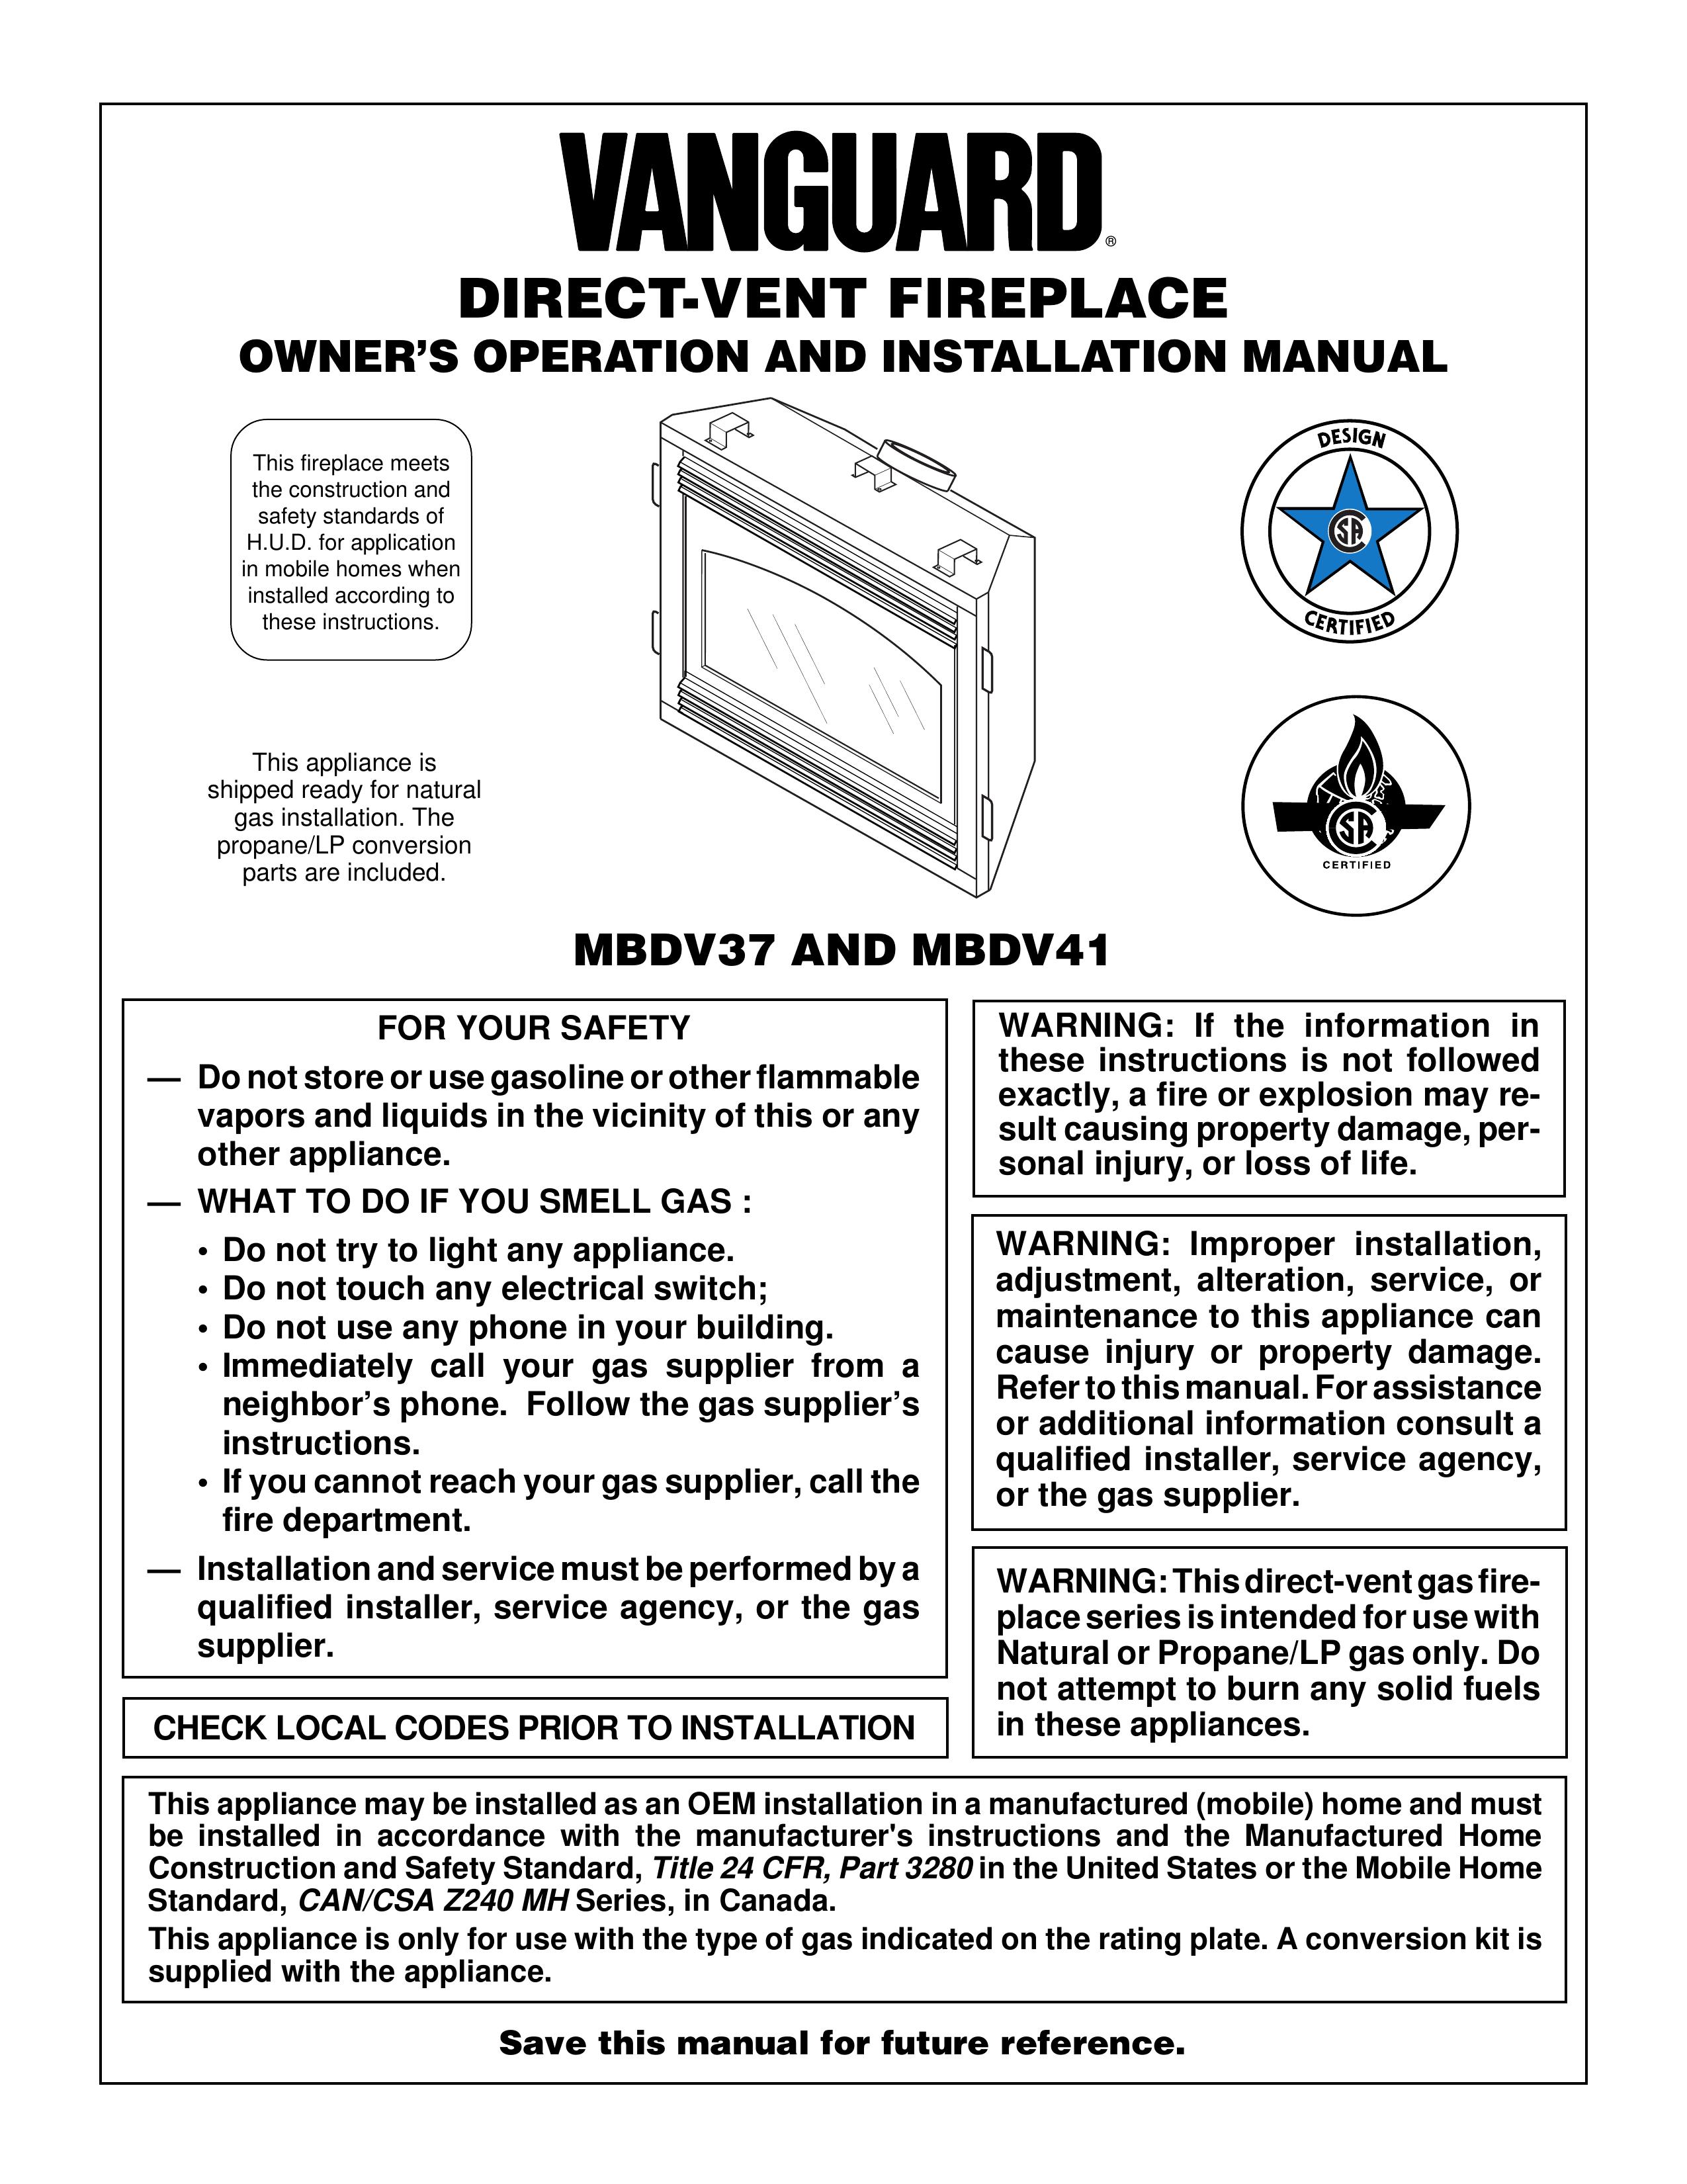 Vanguard Managed Solutions MBDV41 Outdoor Fireplace User Manual